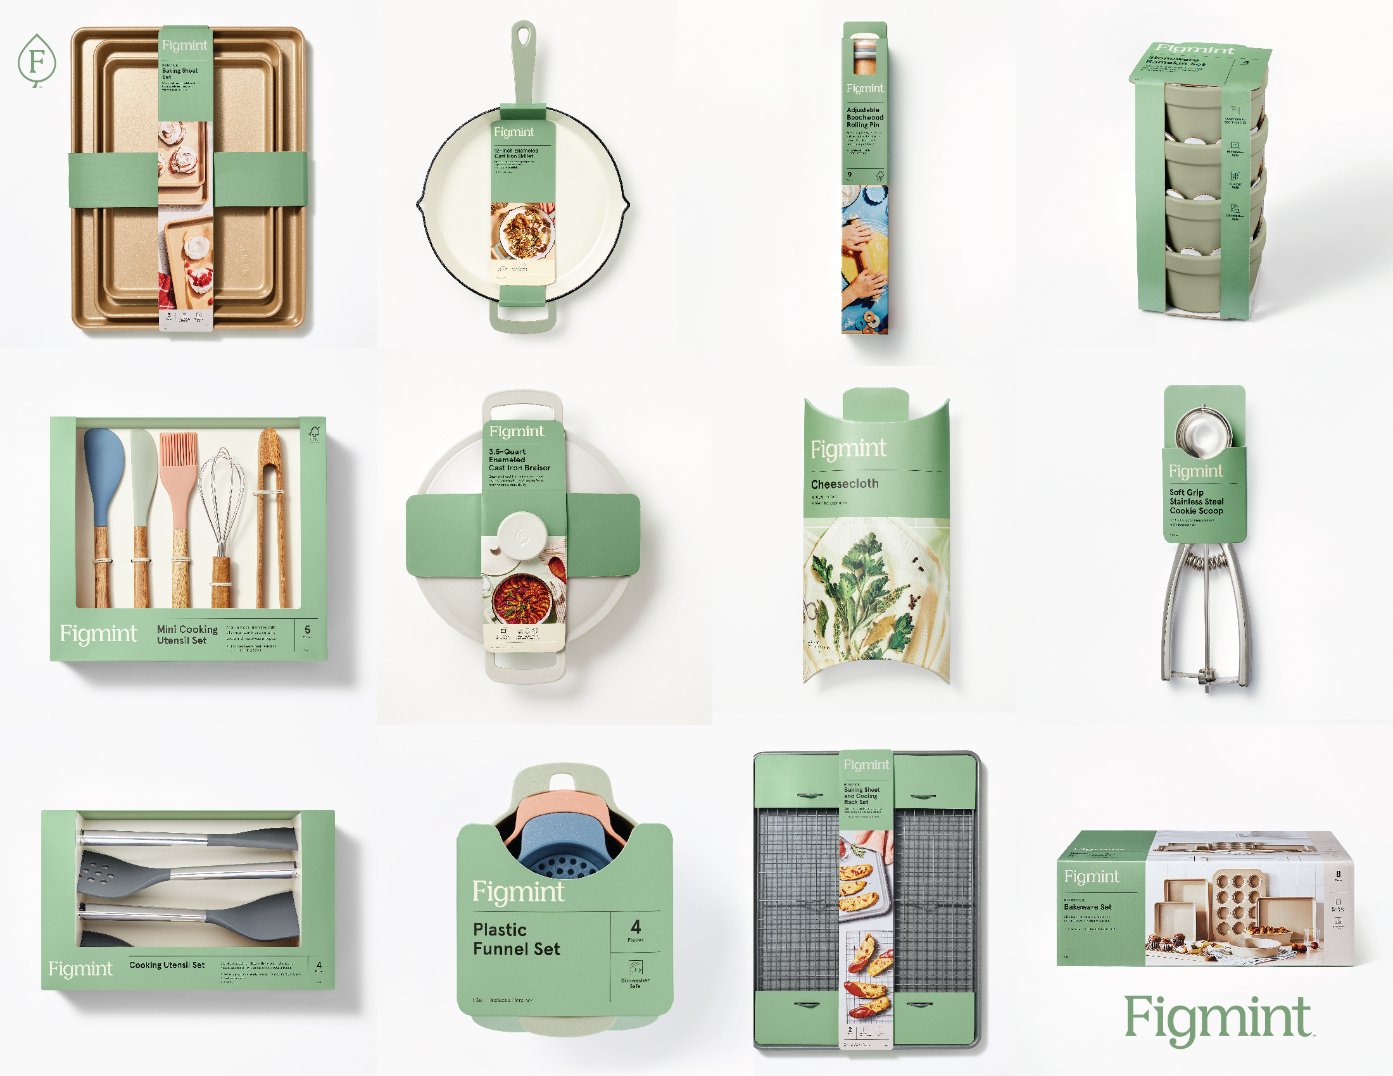 Figmint Makes Target’s Cookware More Stylish and Sustainable